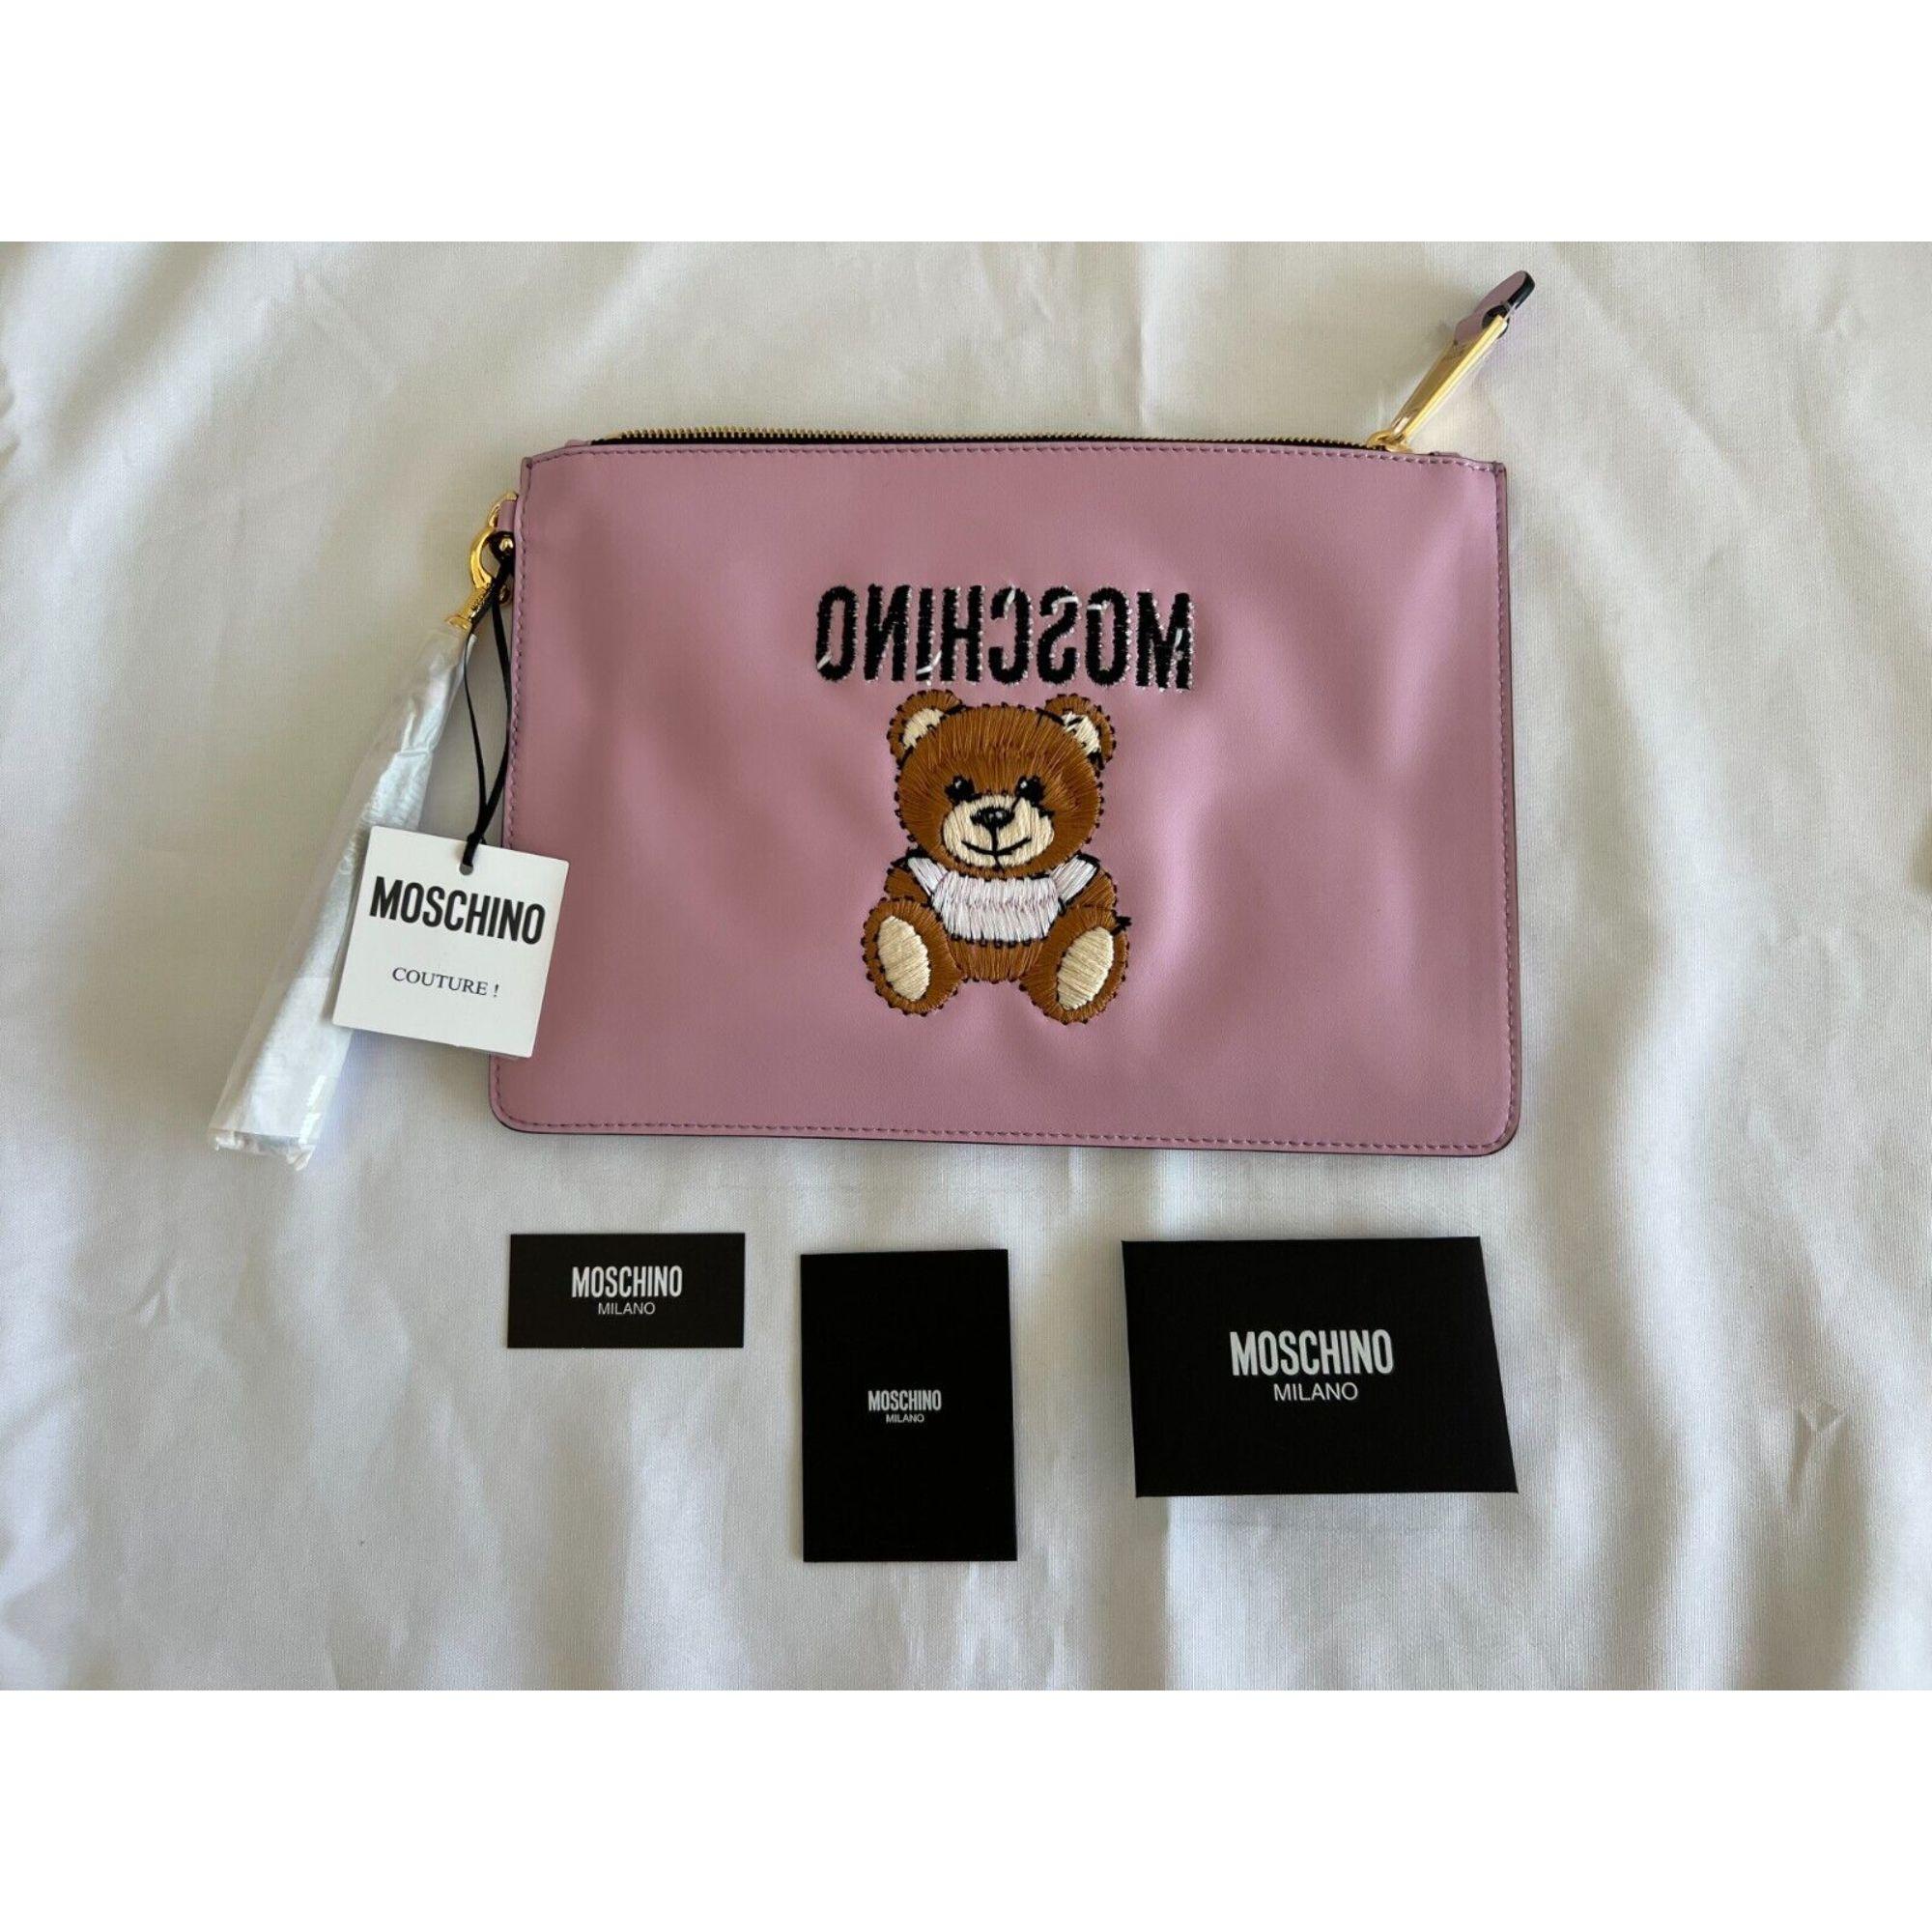 SS21 Moschino Couture Pink Clutch with Embroidered Teddy Bear by Jeremy Scott For Sale 2